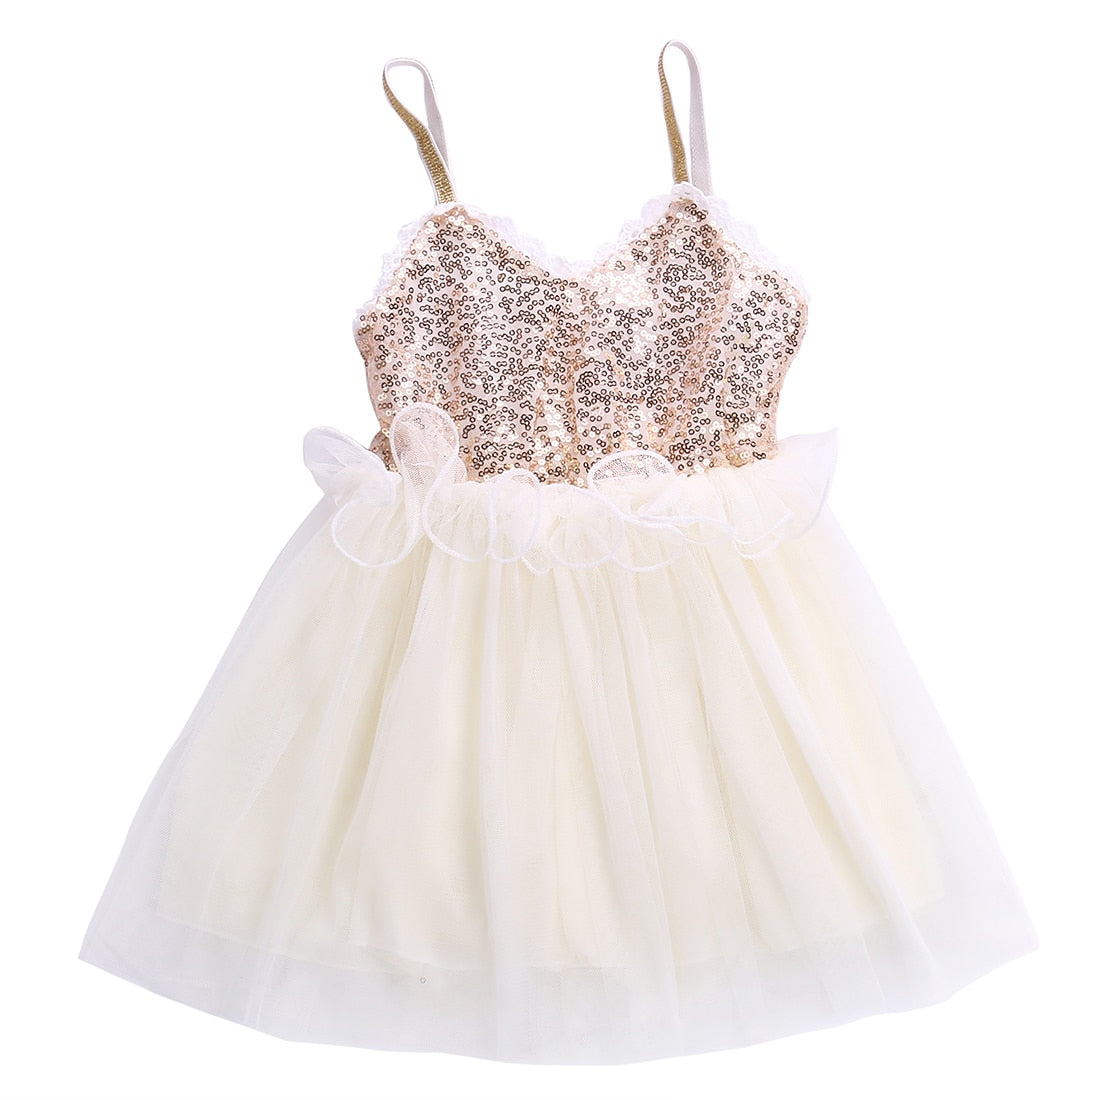 4colors Sequins Princess Baby Girl Dress Lace Tulle Party Gown Fancy Dresses Birthday - ebowsos